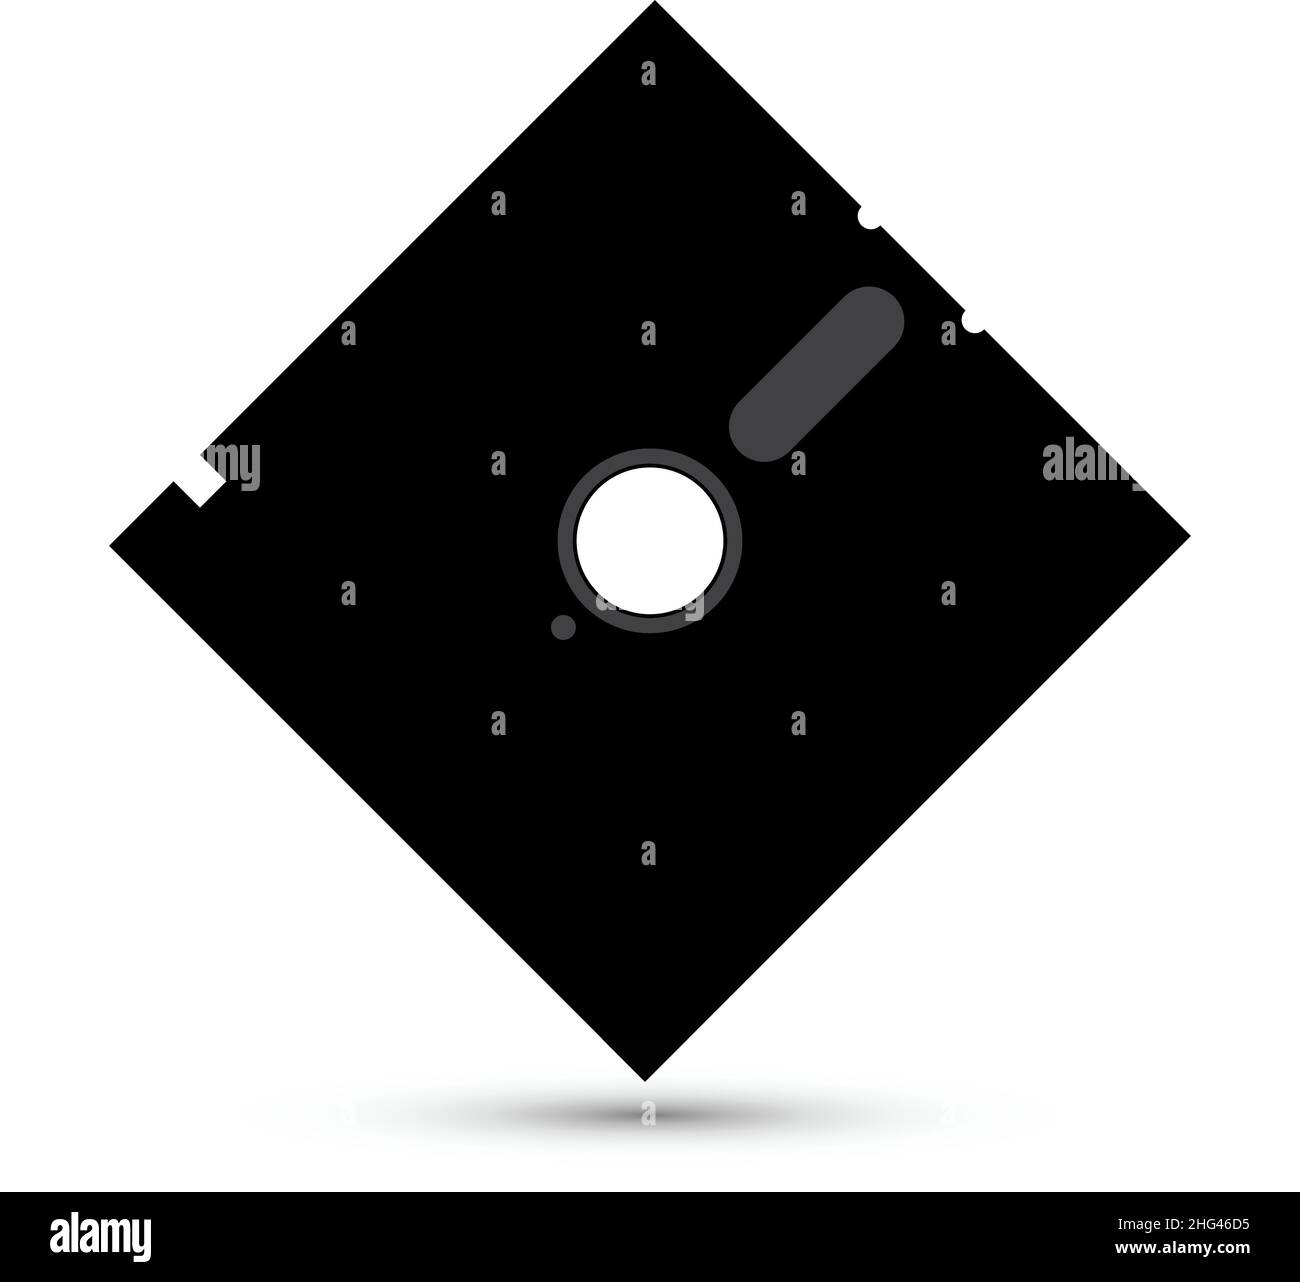 The back of an old computer floppy disk on a white background Stock Vector